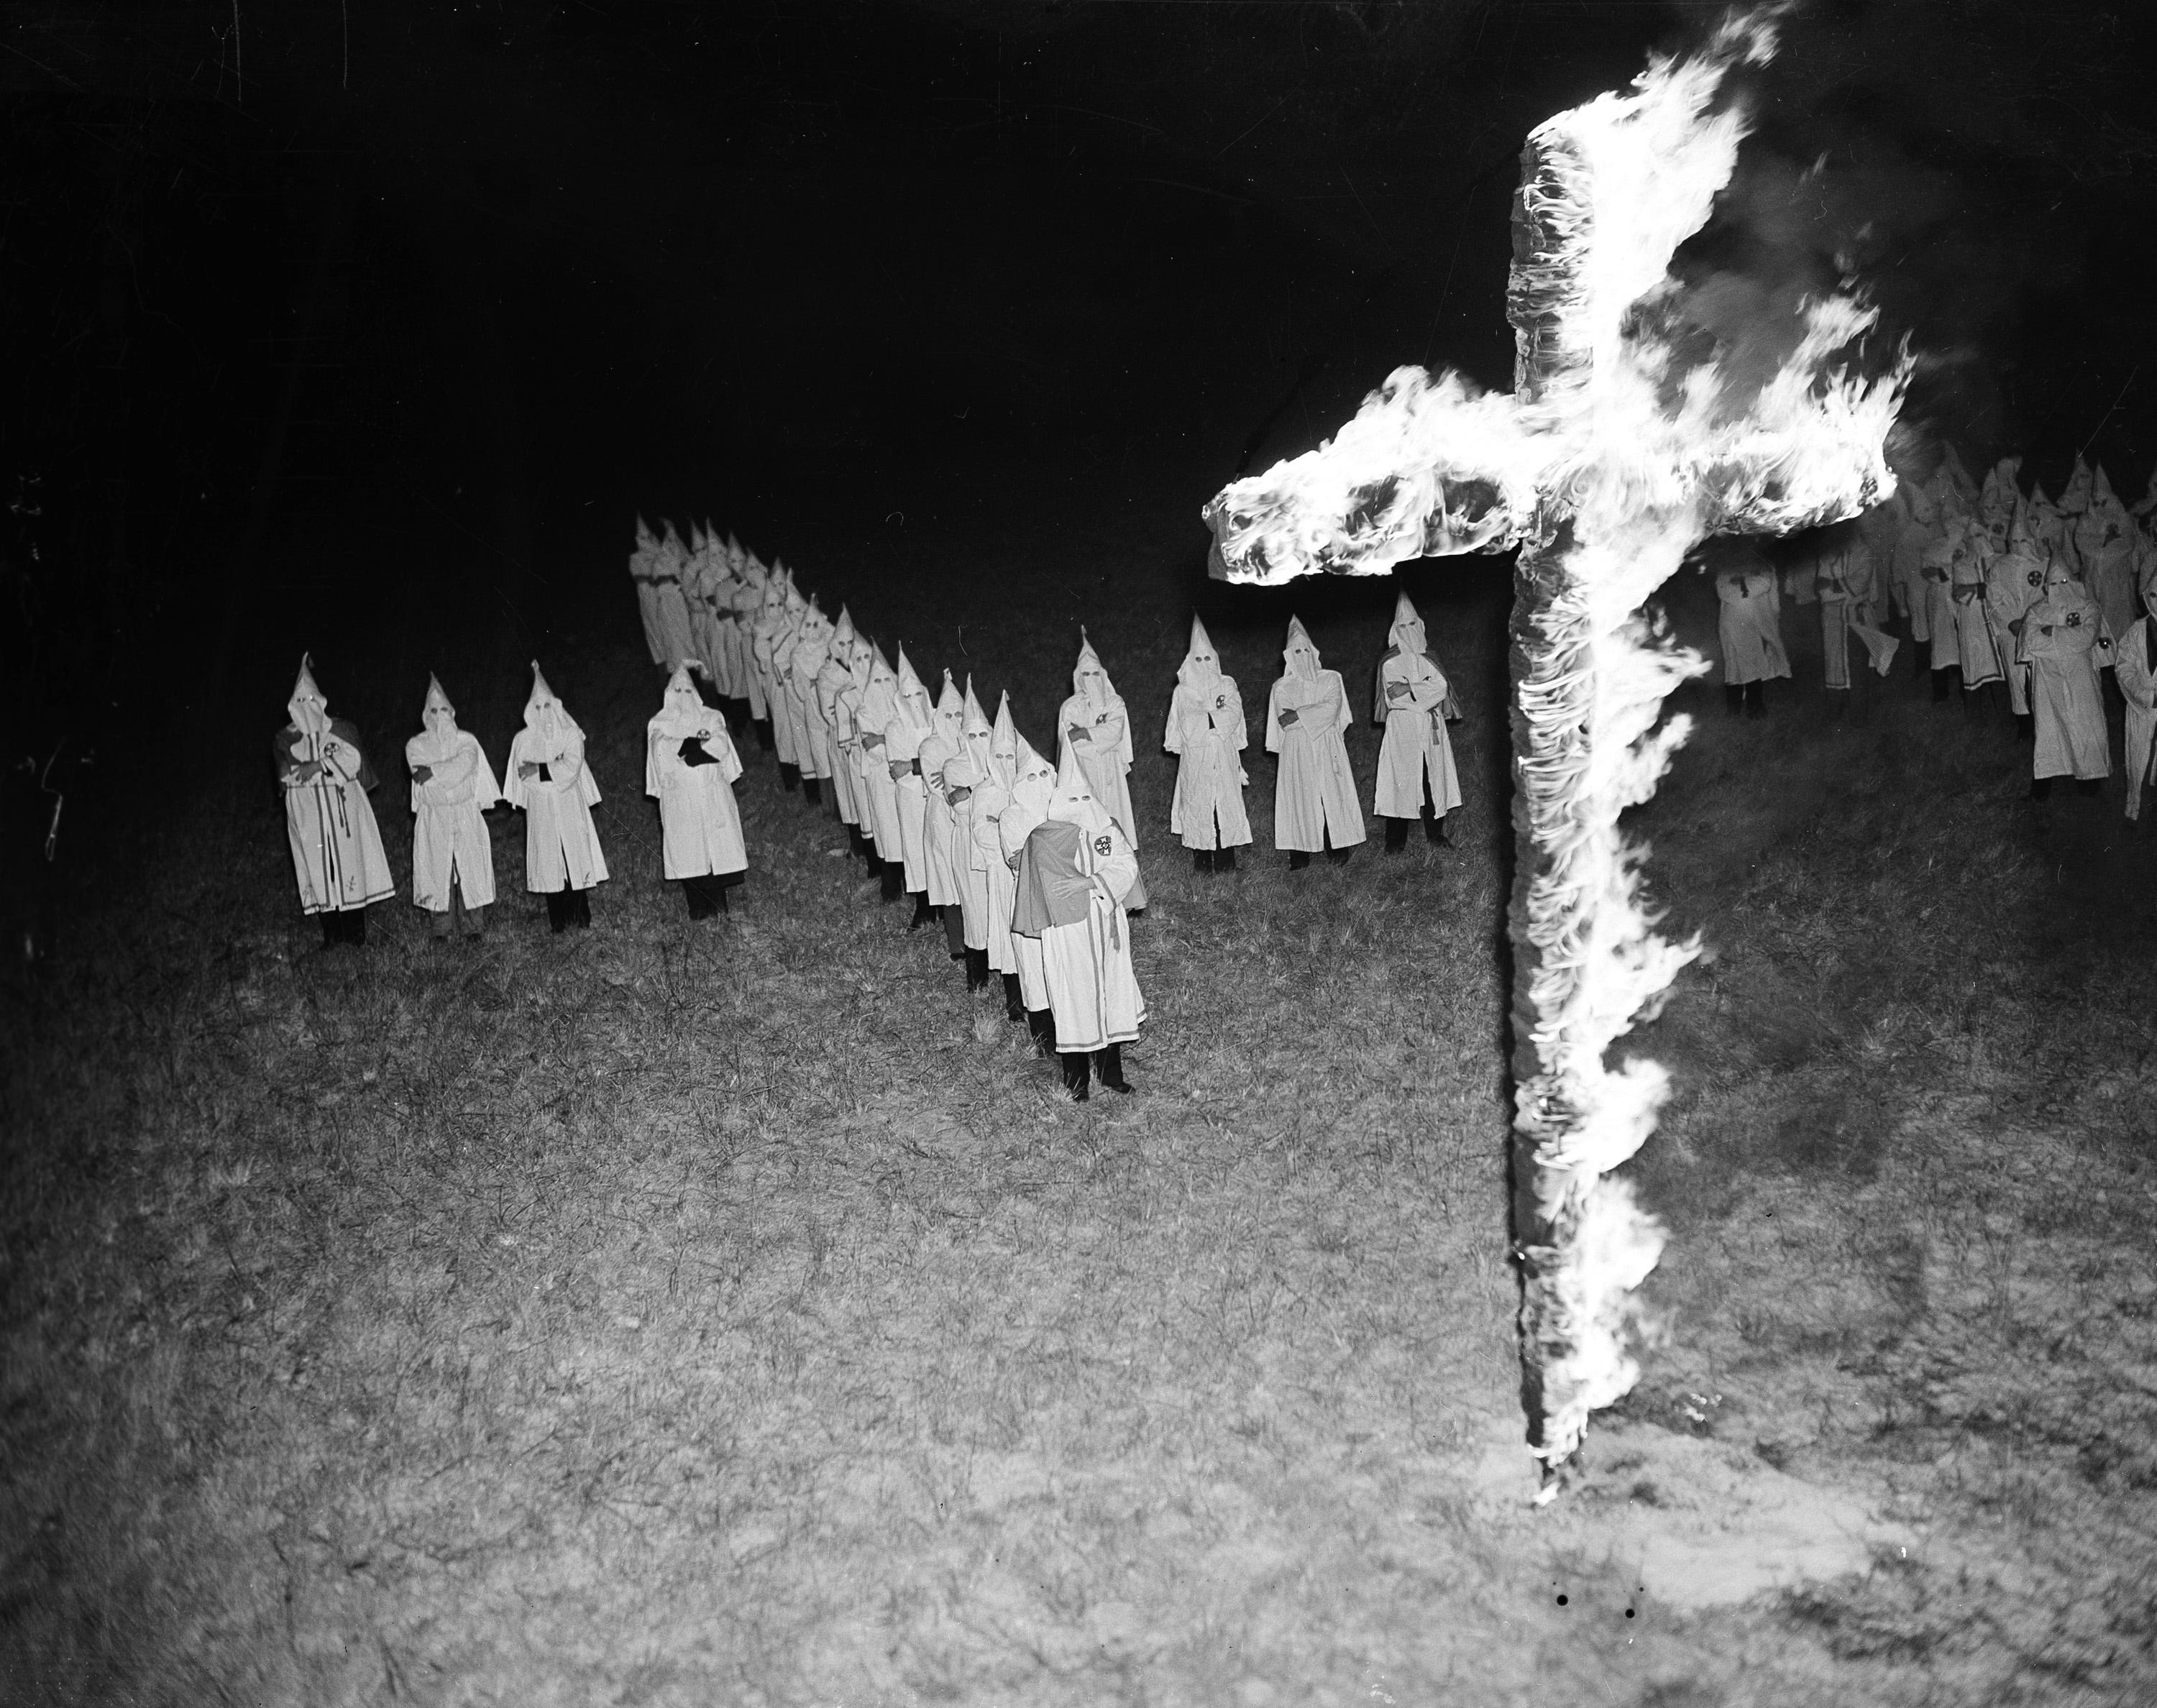 Members of the Ku Klux Klan, wearing traditional white hoods and robes, stand back and watch with their arms crossed after burning a 15-foot cross in Tampa on Jan. 30, 1939.